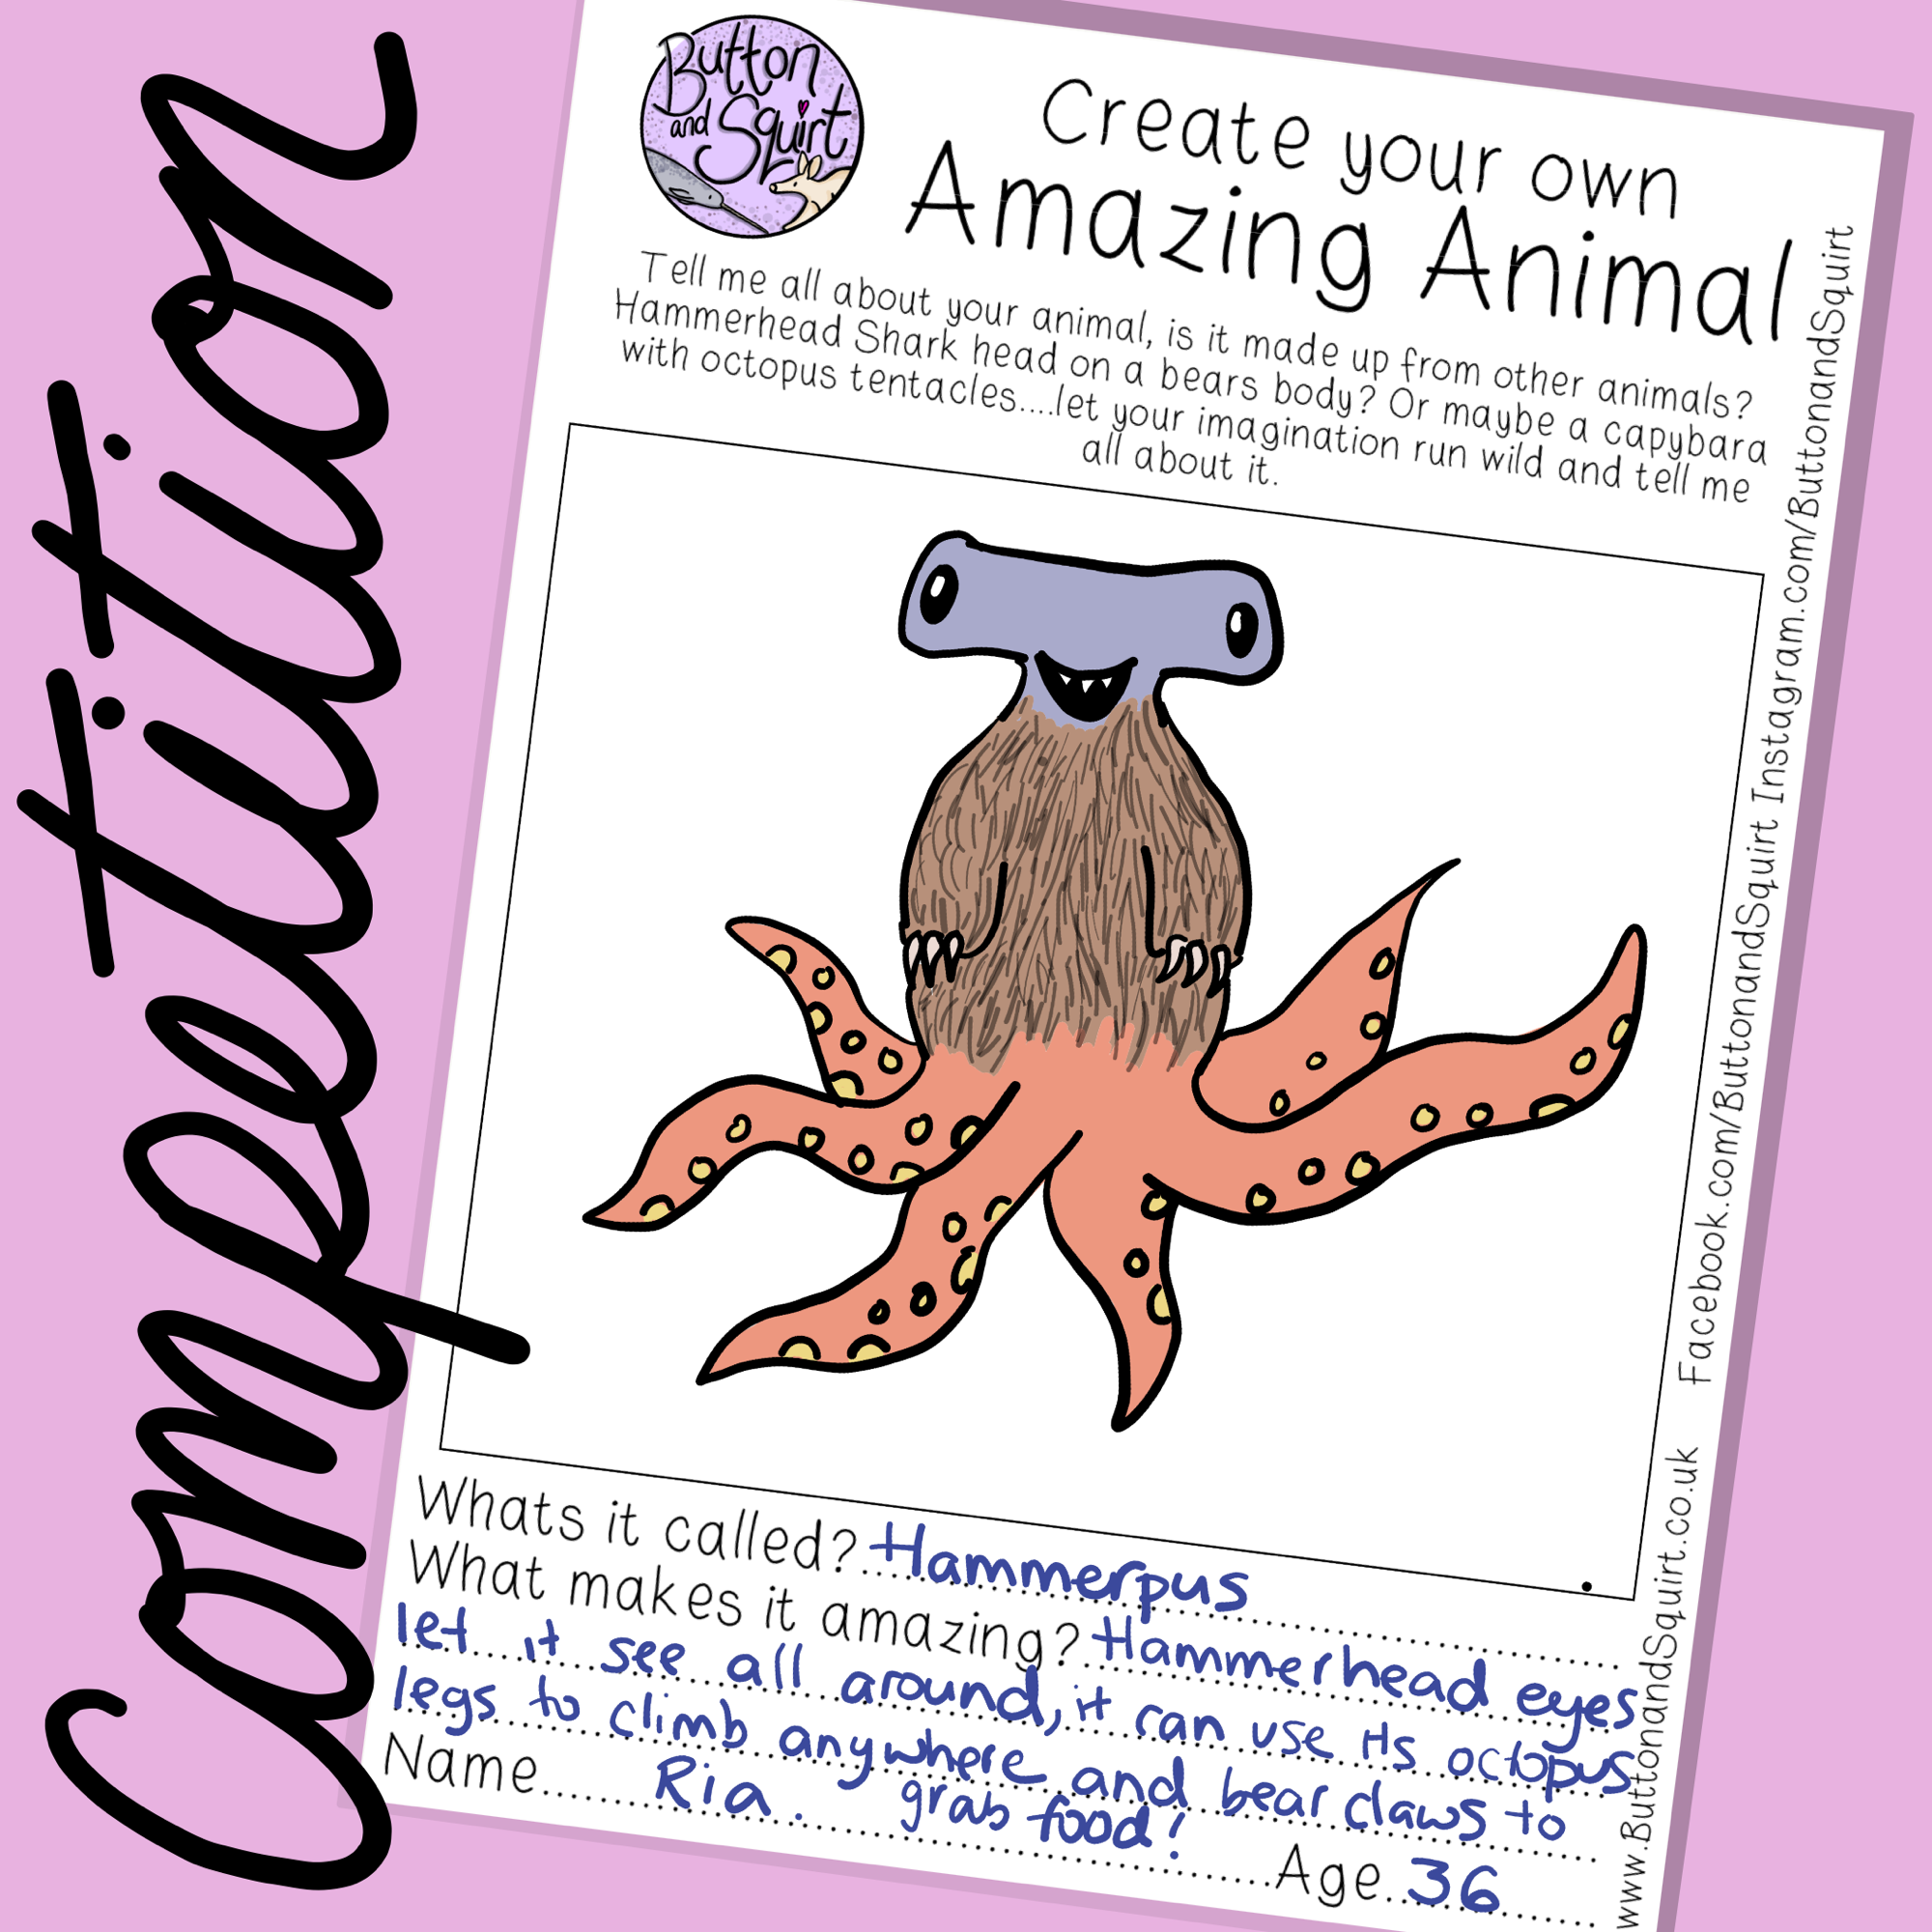 Amazing animal competition time